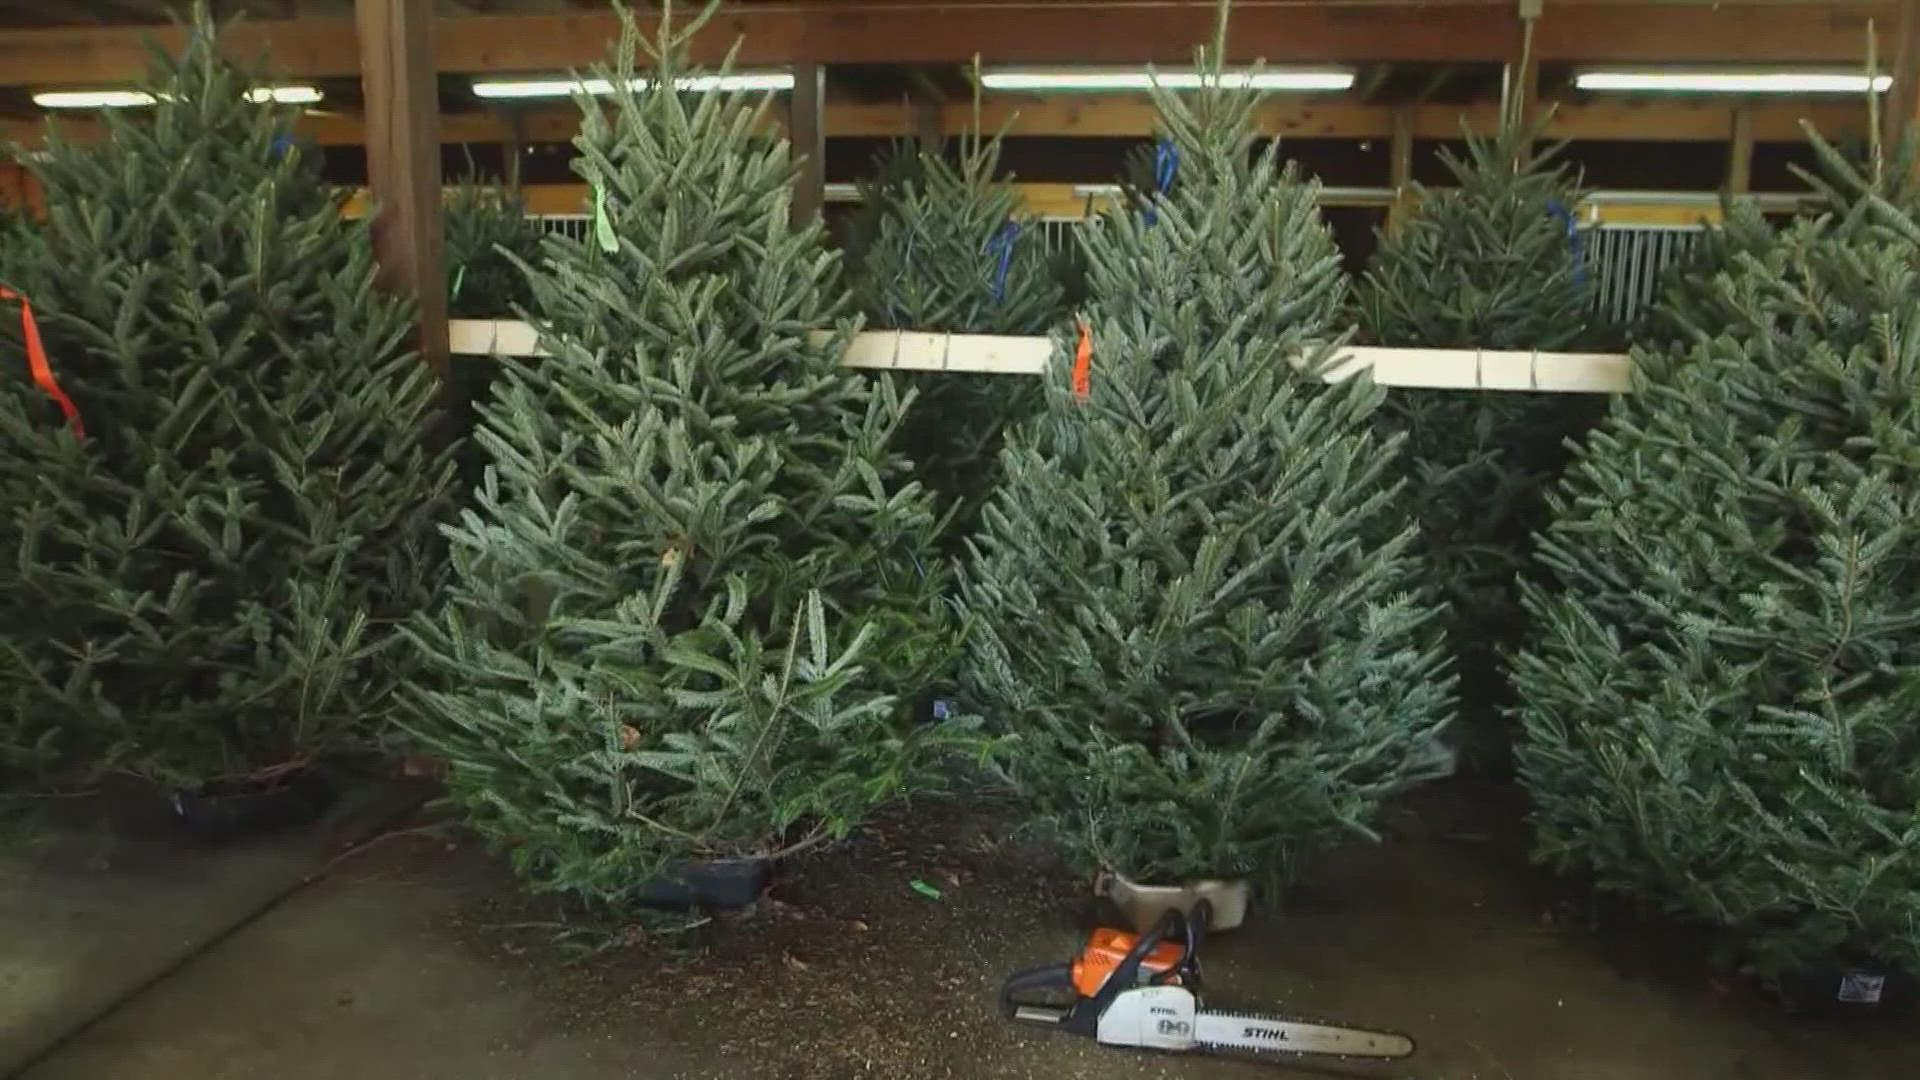 Christmas tree suppliers are having trouble keeping up with the rising cost of equipment, fuel, transport and more.